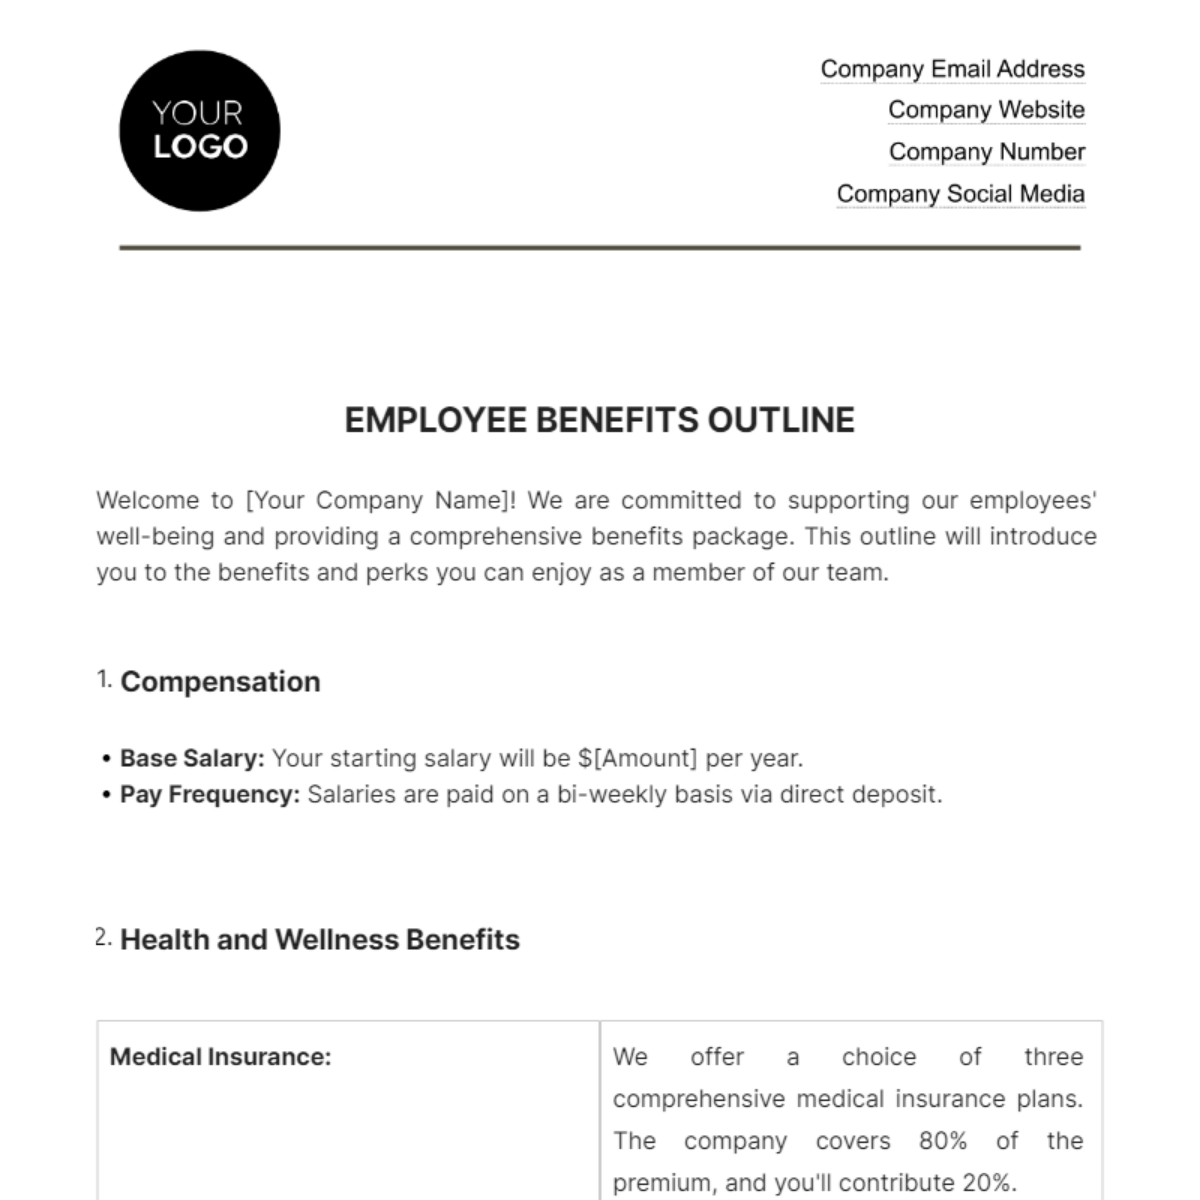 Free Employee Benefits Outline HR Template